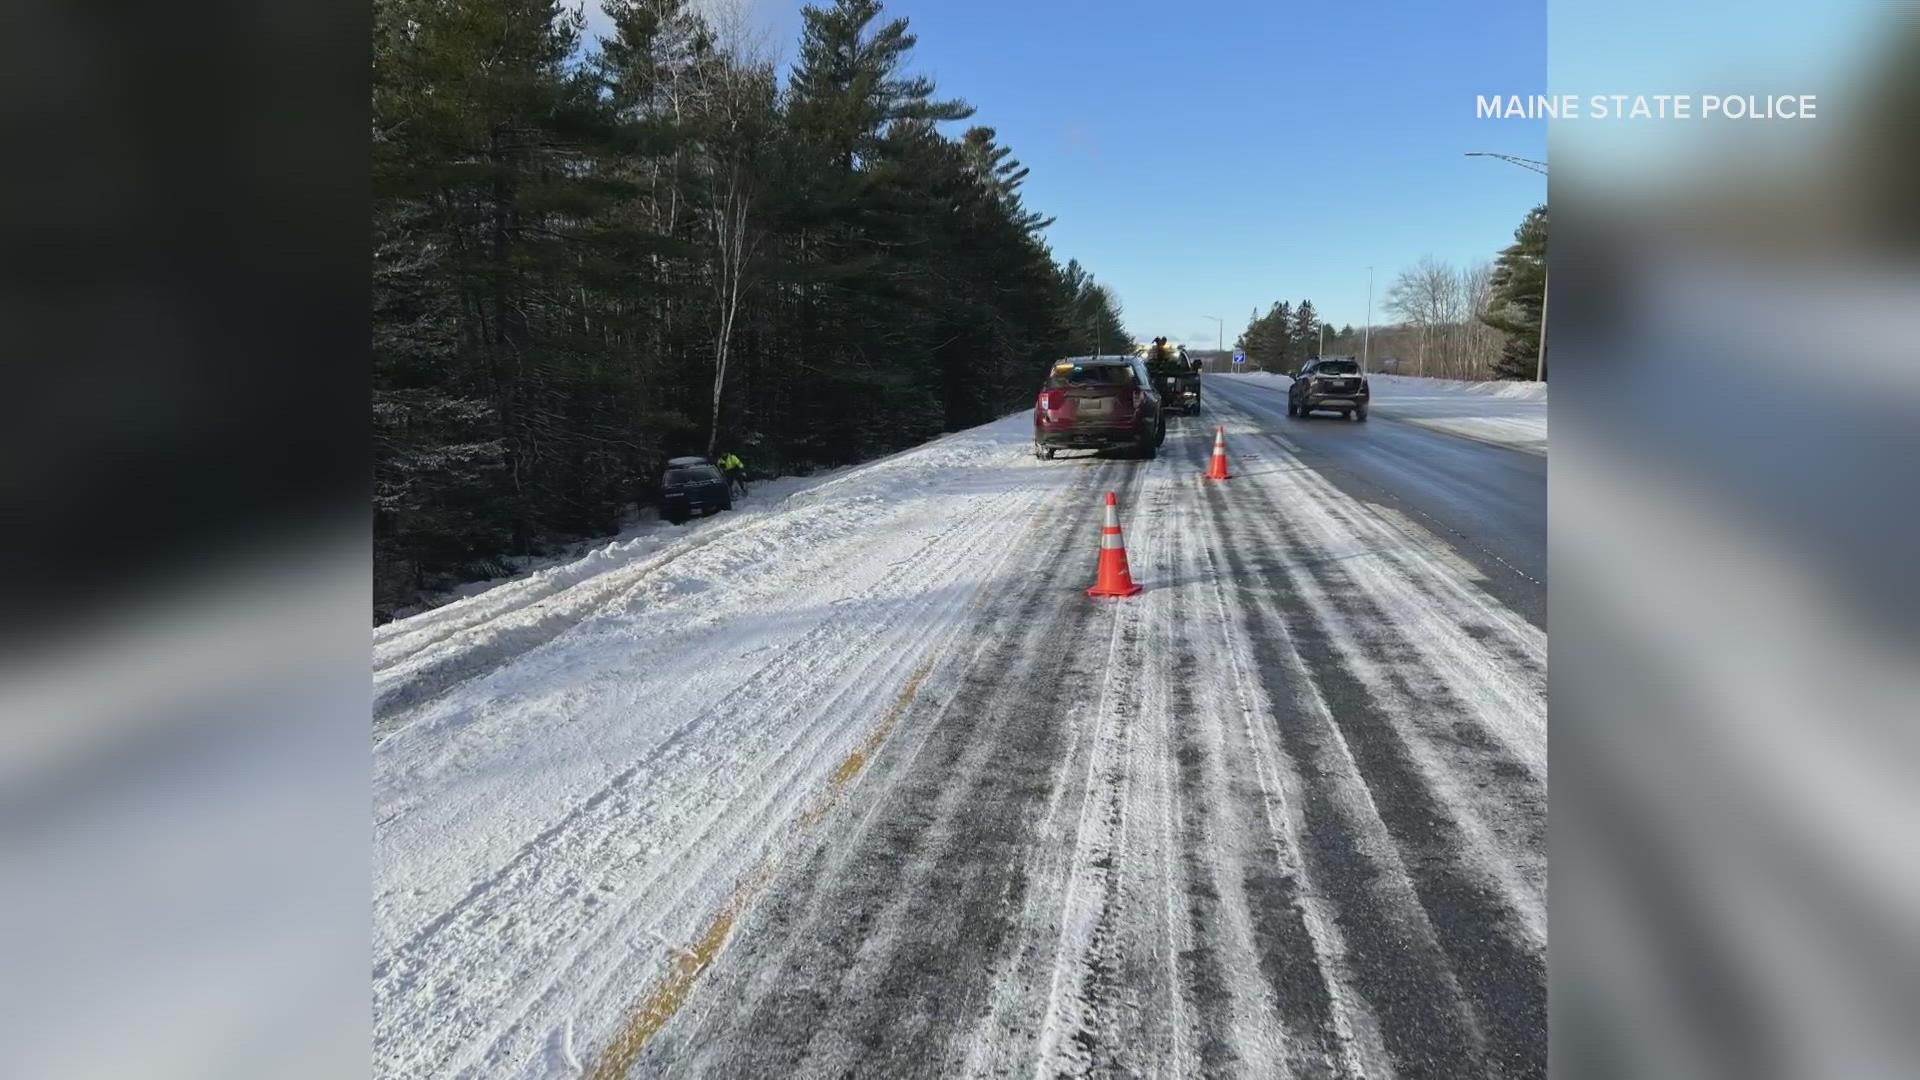 Maine State Troopers and the Northern Field Troop were called to more than 20 crashes and slide-offs during the small snowstorm, according to police.